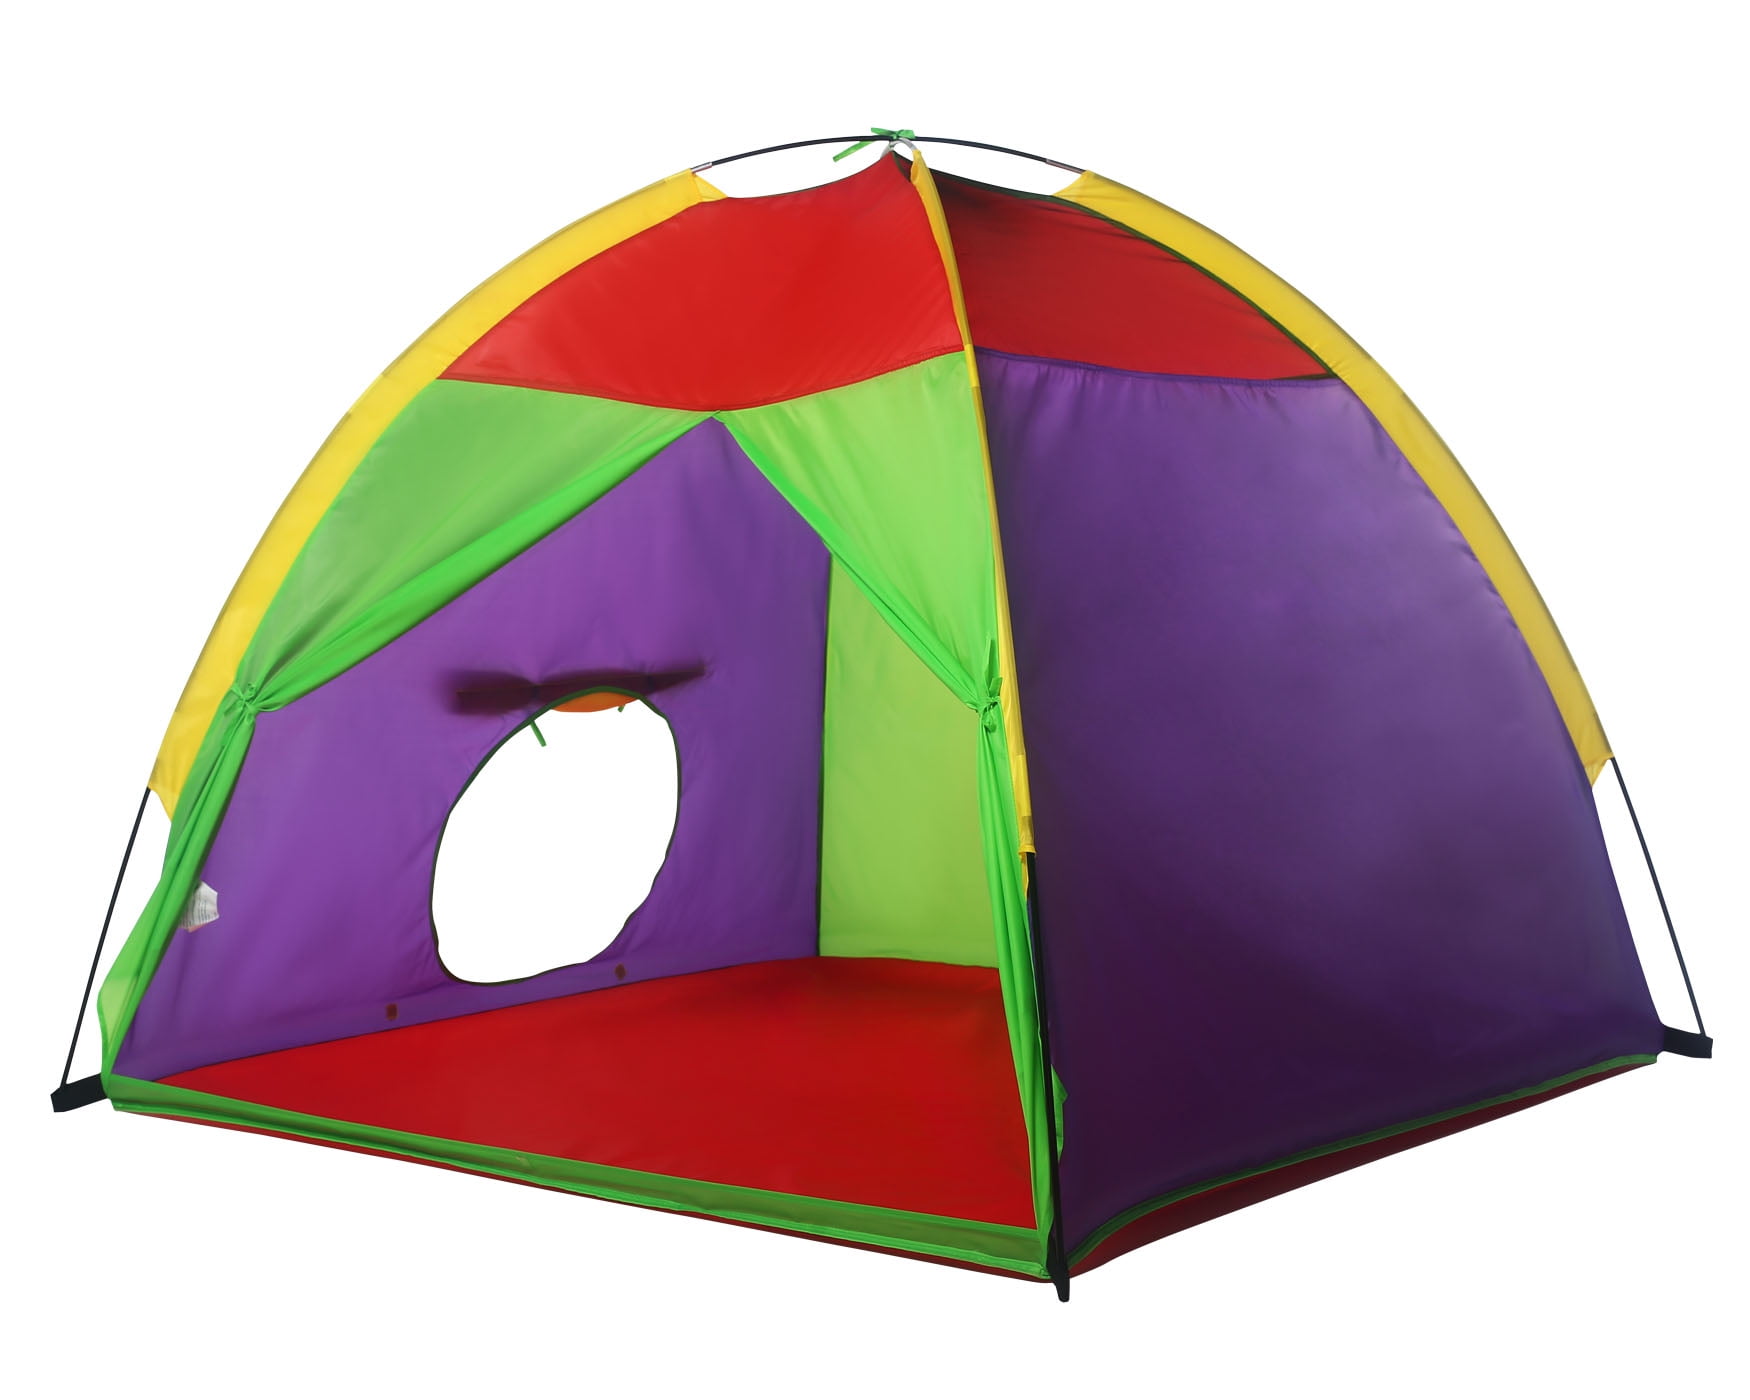 Details about   Kids Camping Tent Set Toys Pop Up Play Tent Indoor Outdoor Playhouse Gift 